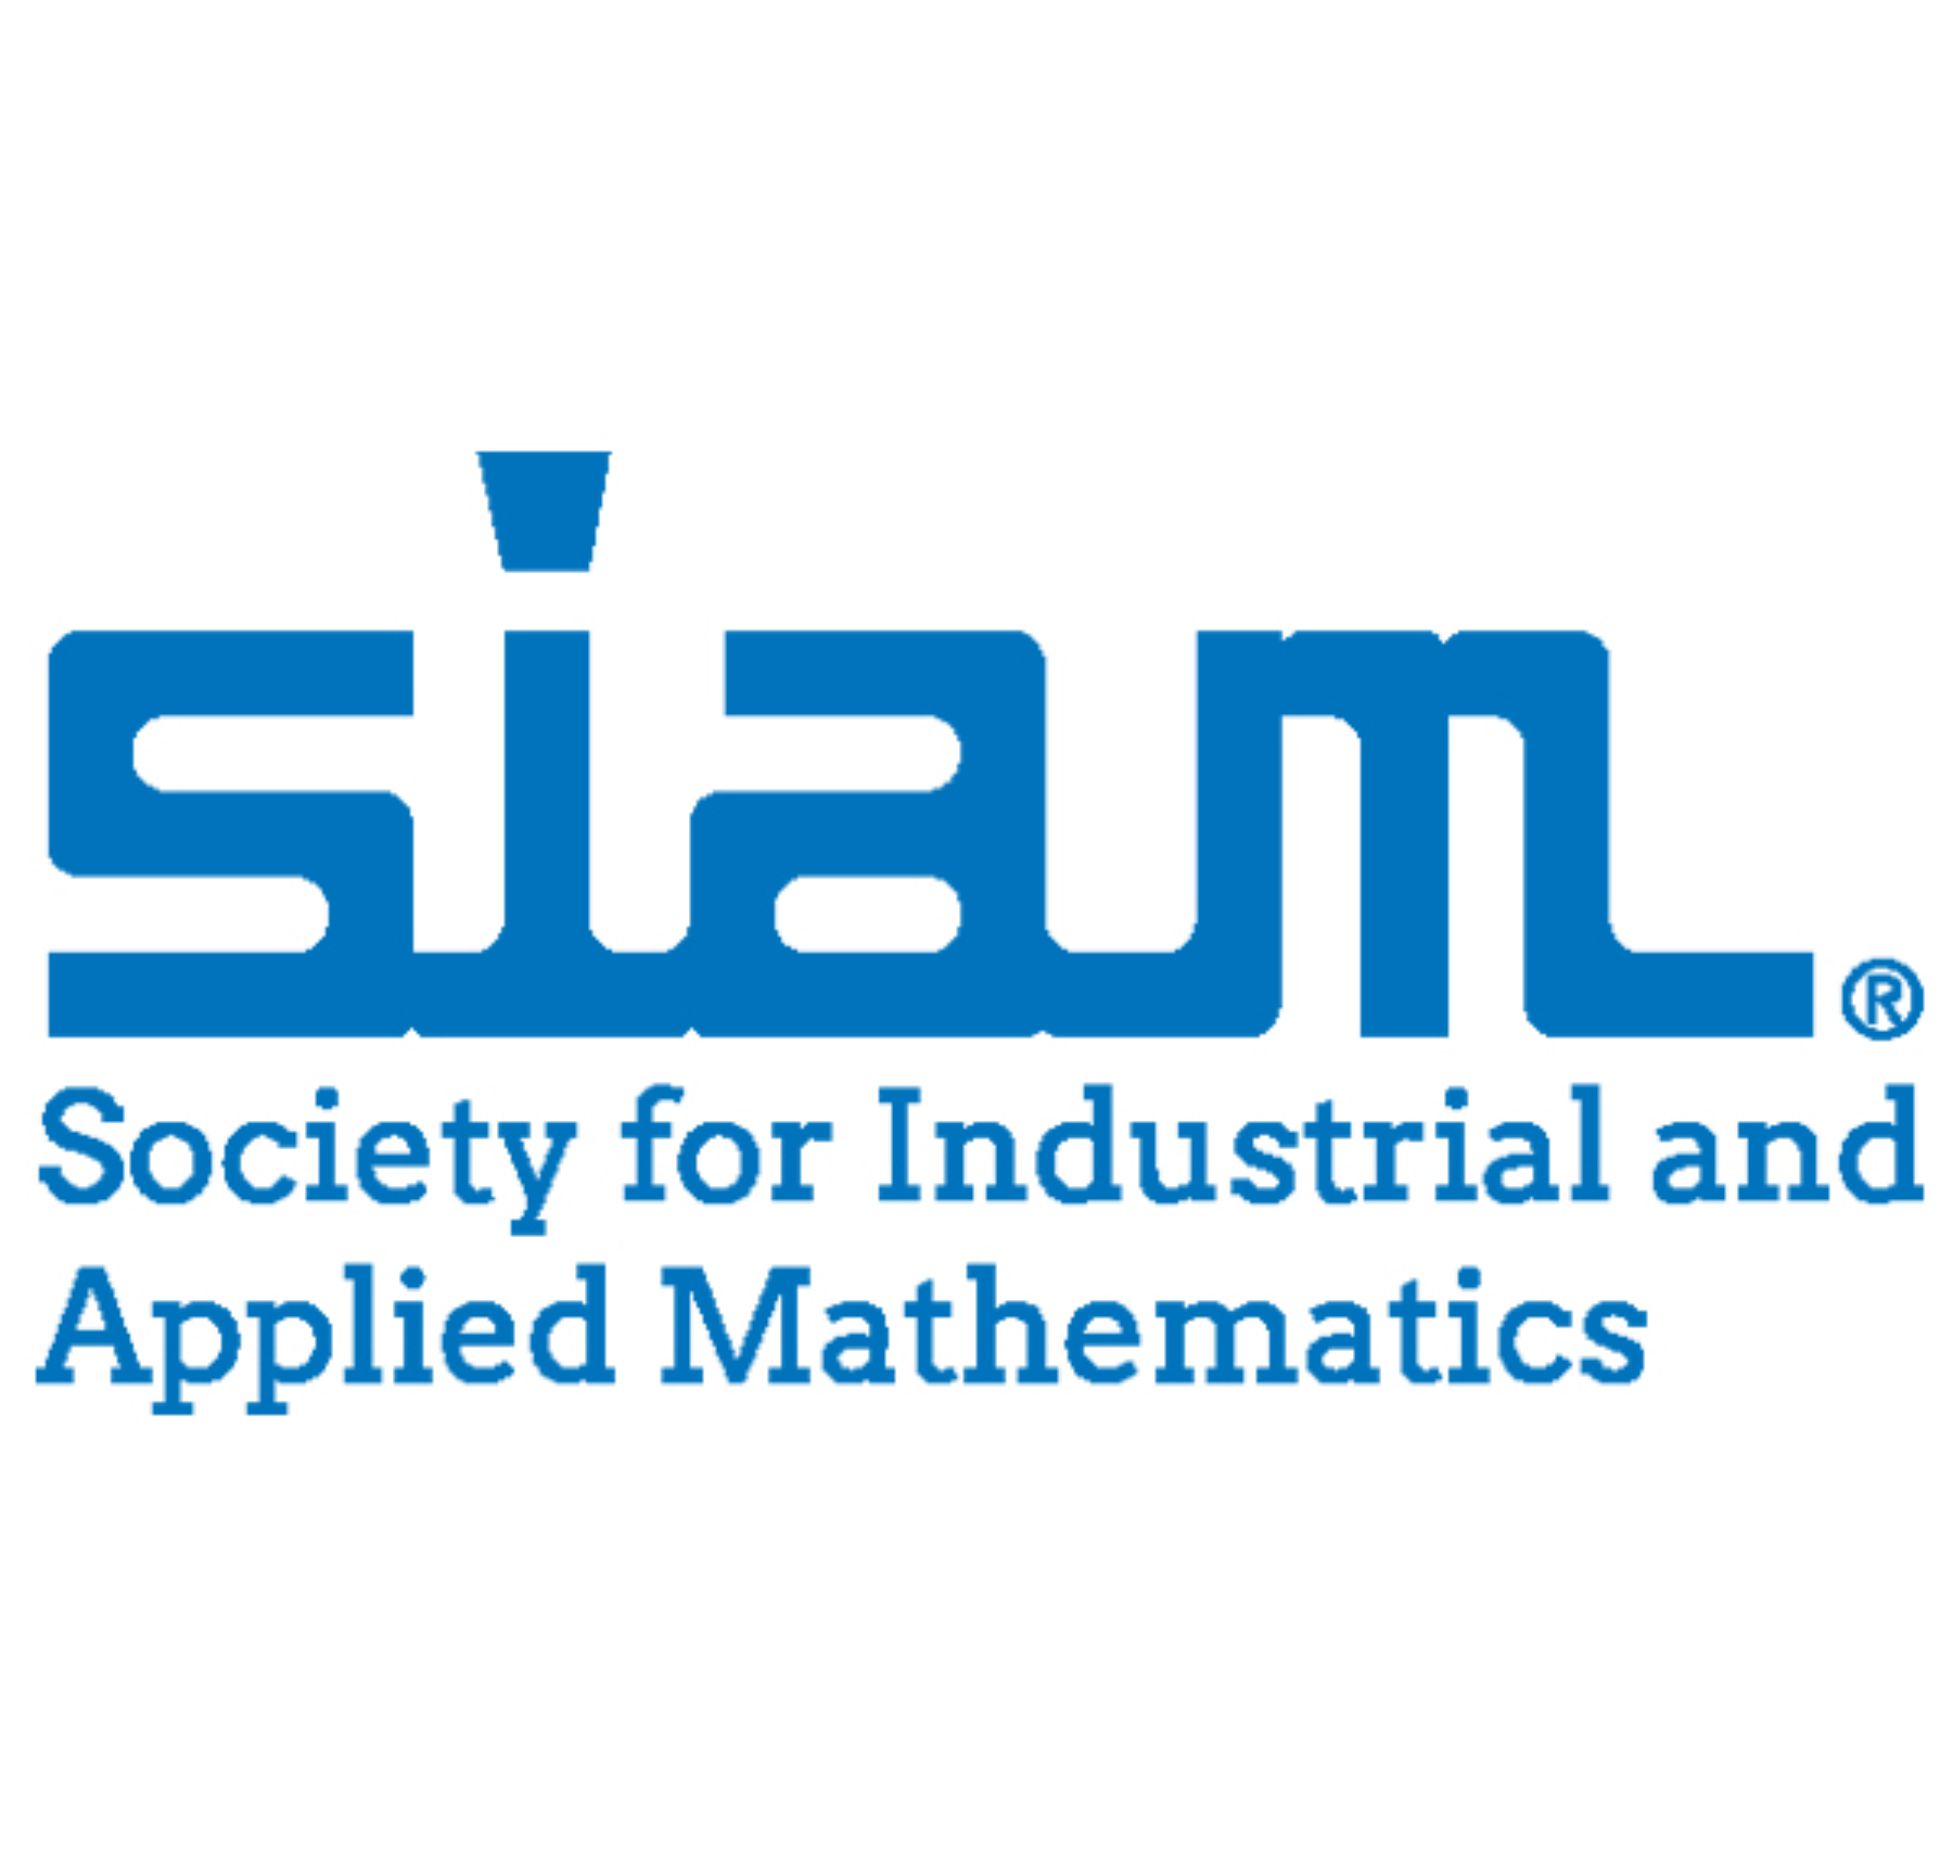 Society for Industrial and Applied Mathematics